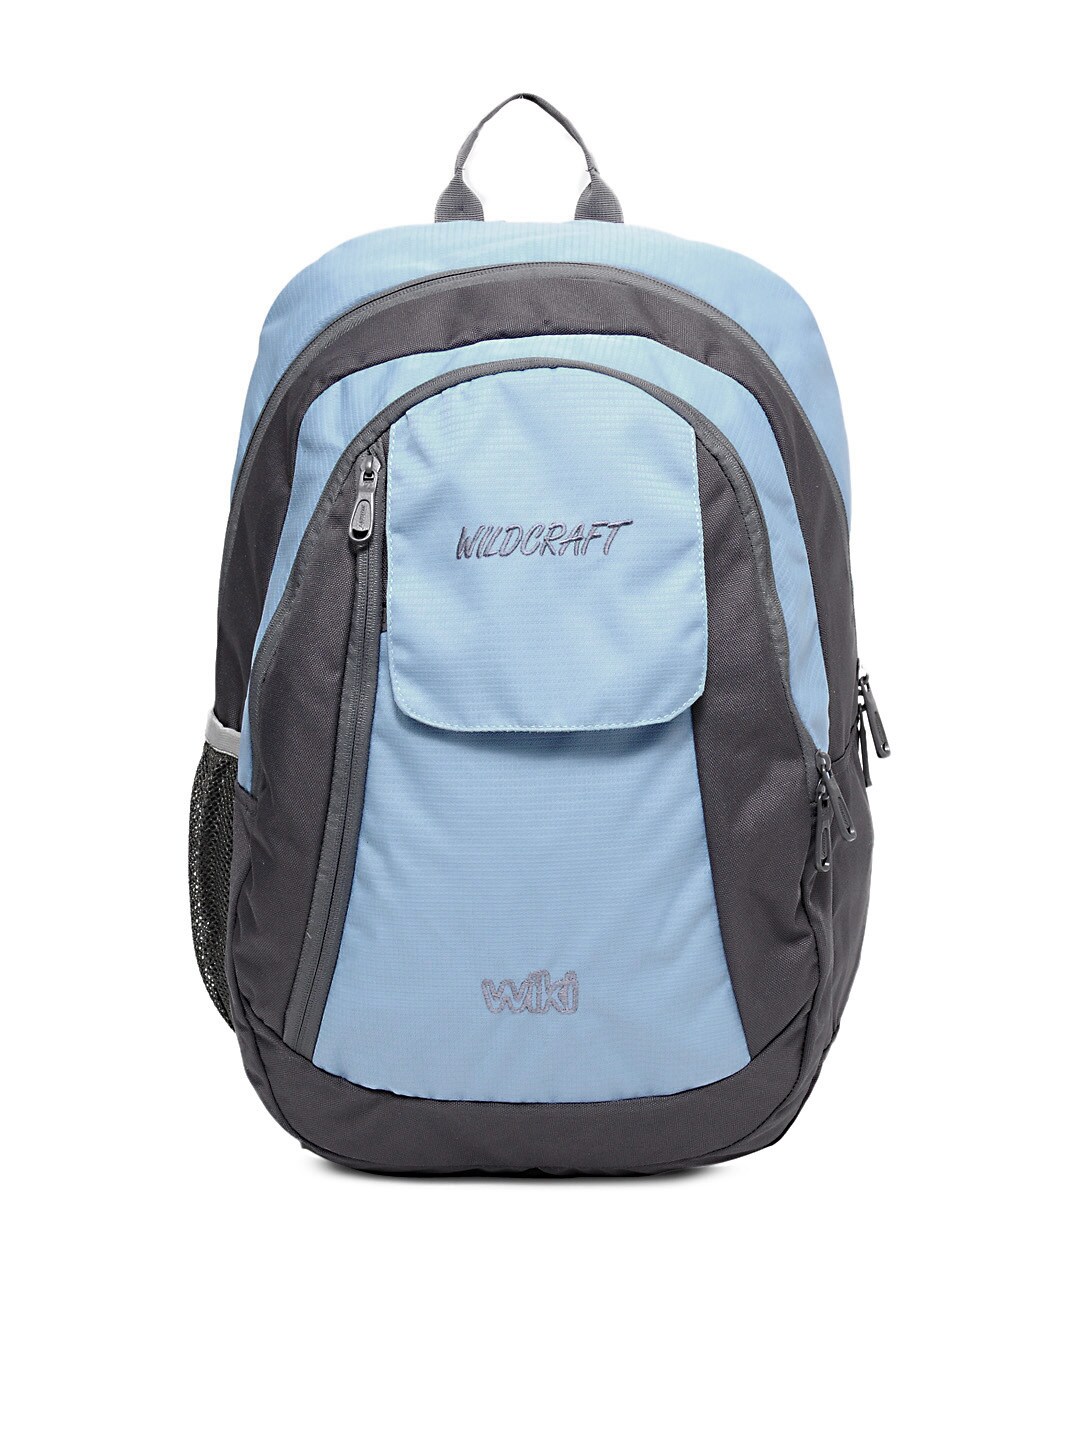 Wildcraft Unisex Blue and Grey Backpack